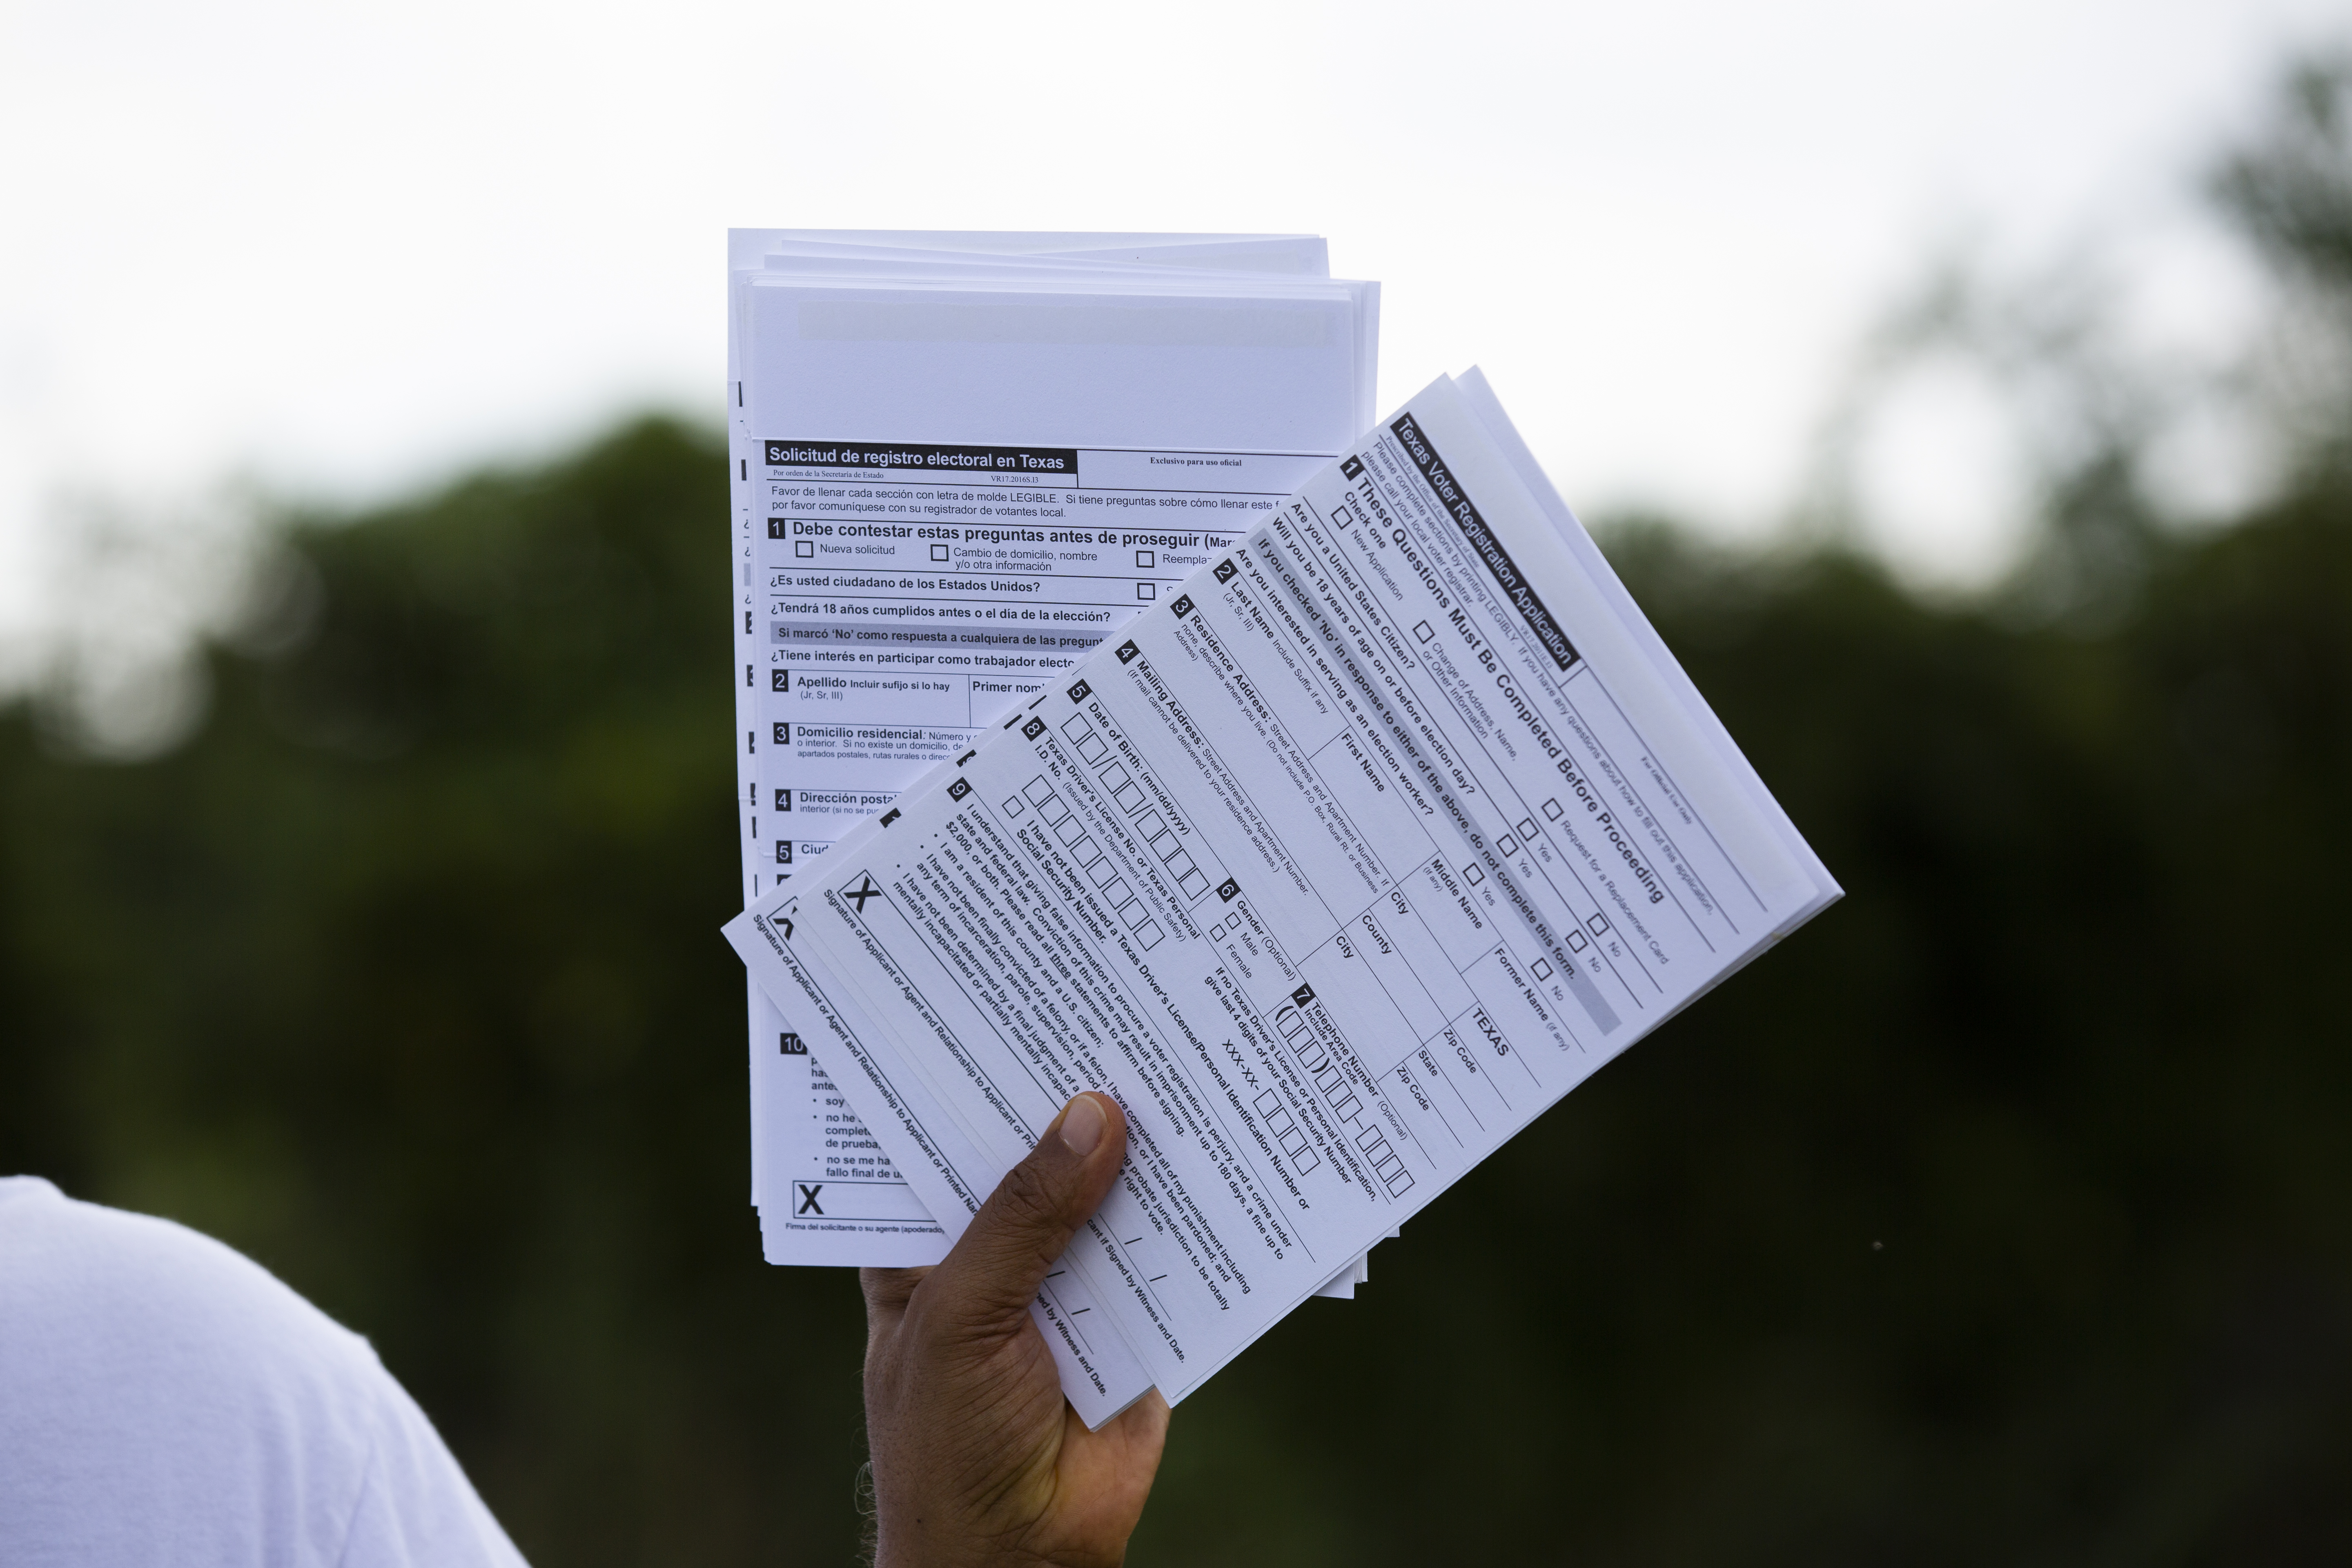 Texas voter registration applications for distribution at a food distribution event, Friday, Sept. 25, 2020, in Houston. (Photo by Marie D. De Jesus/Houston Chronicle via Getty Images)